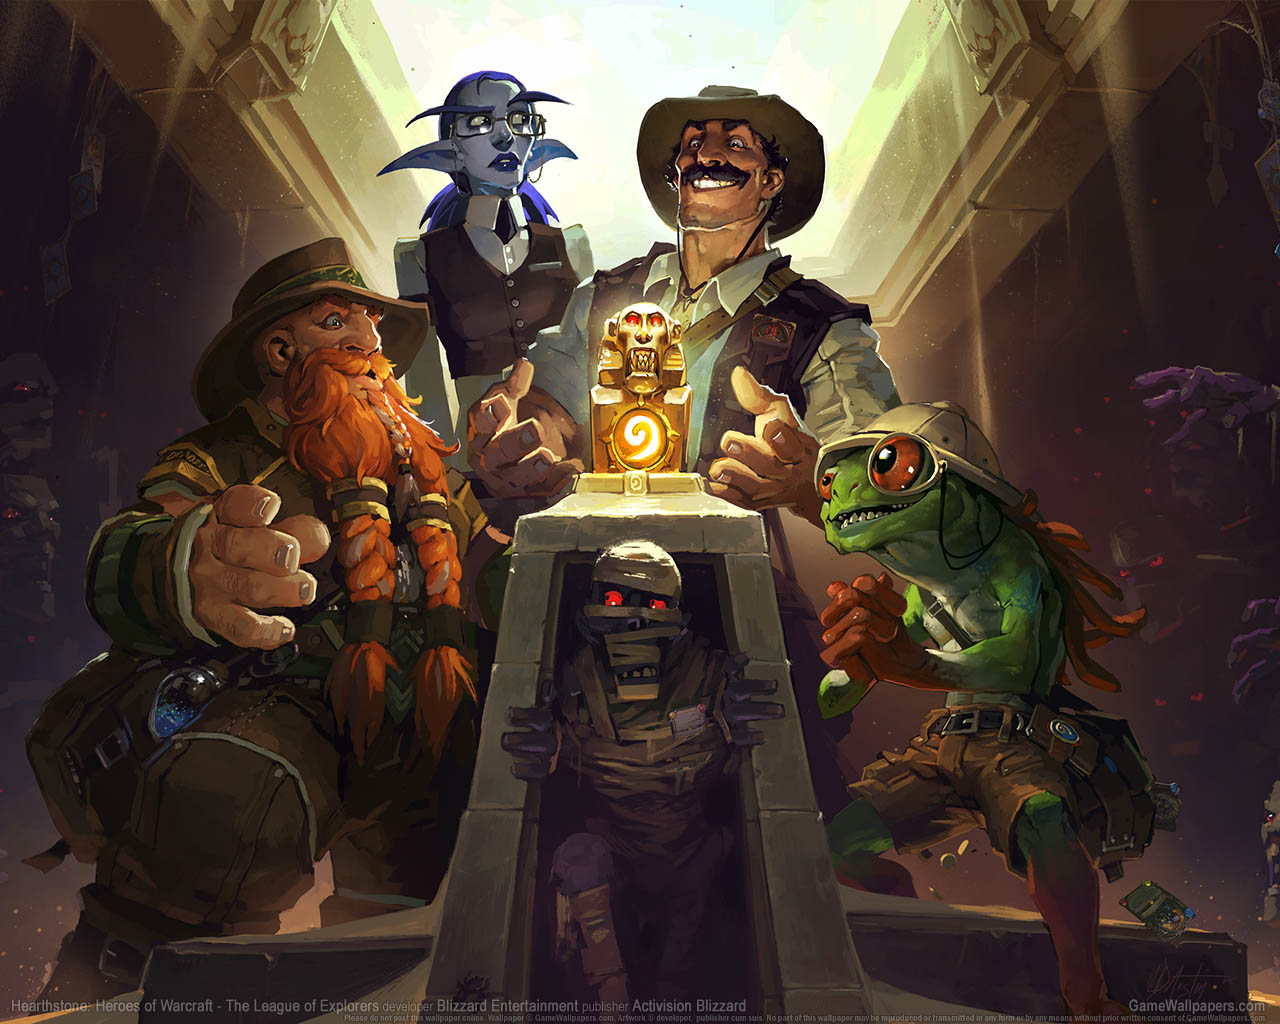 Hearthstone%253A Heroes of Warcraft - The League of Explorers fond d'cran 01 1280x1024